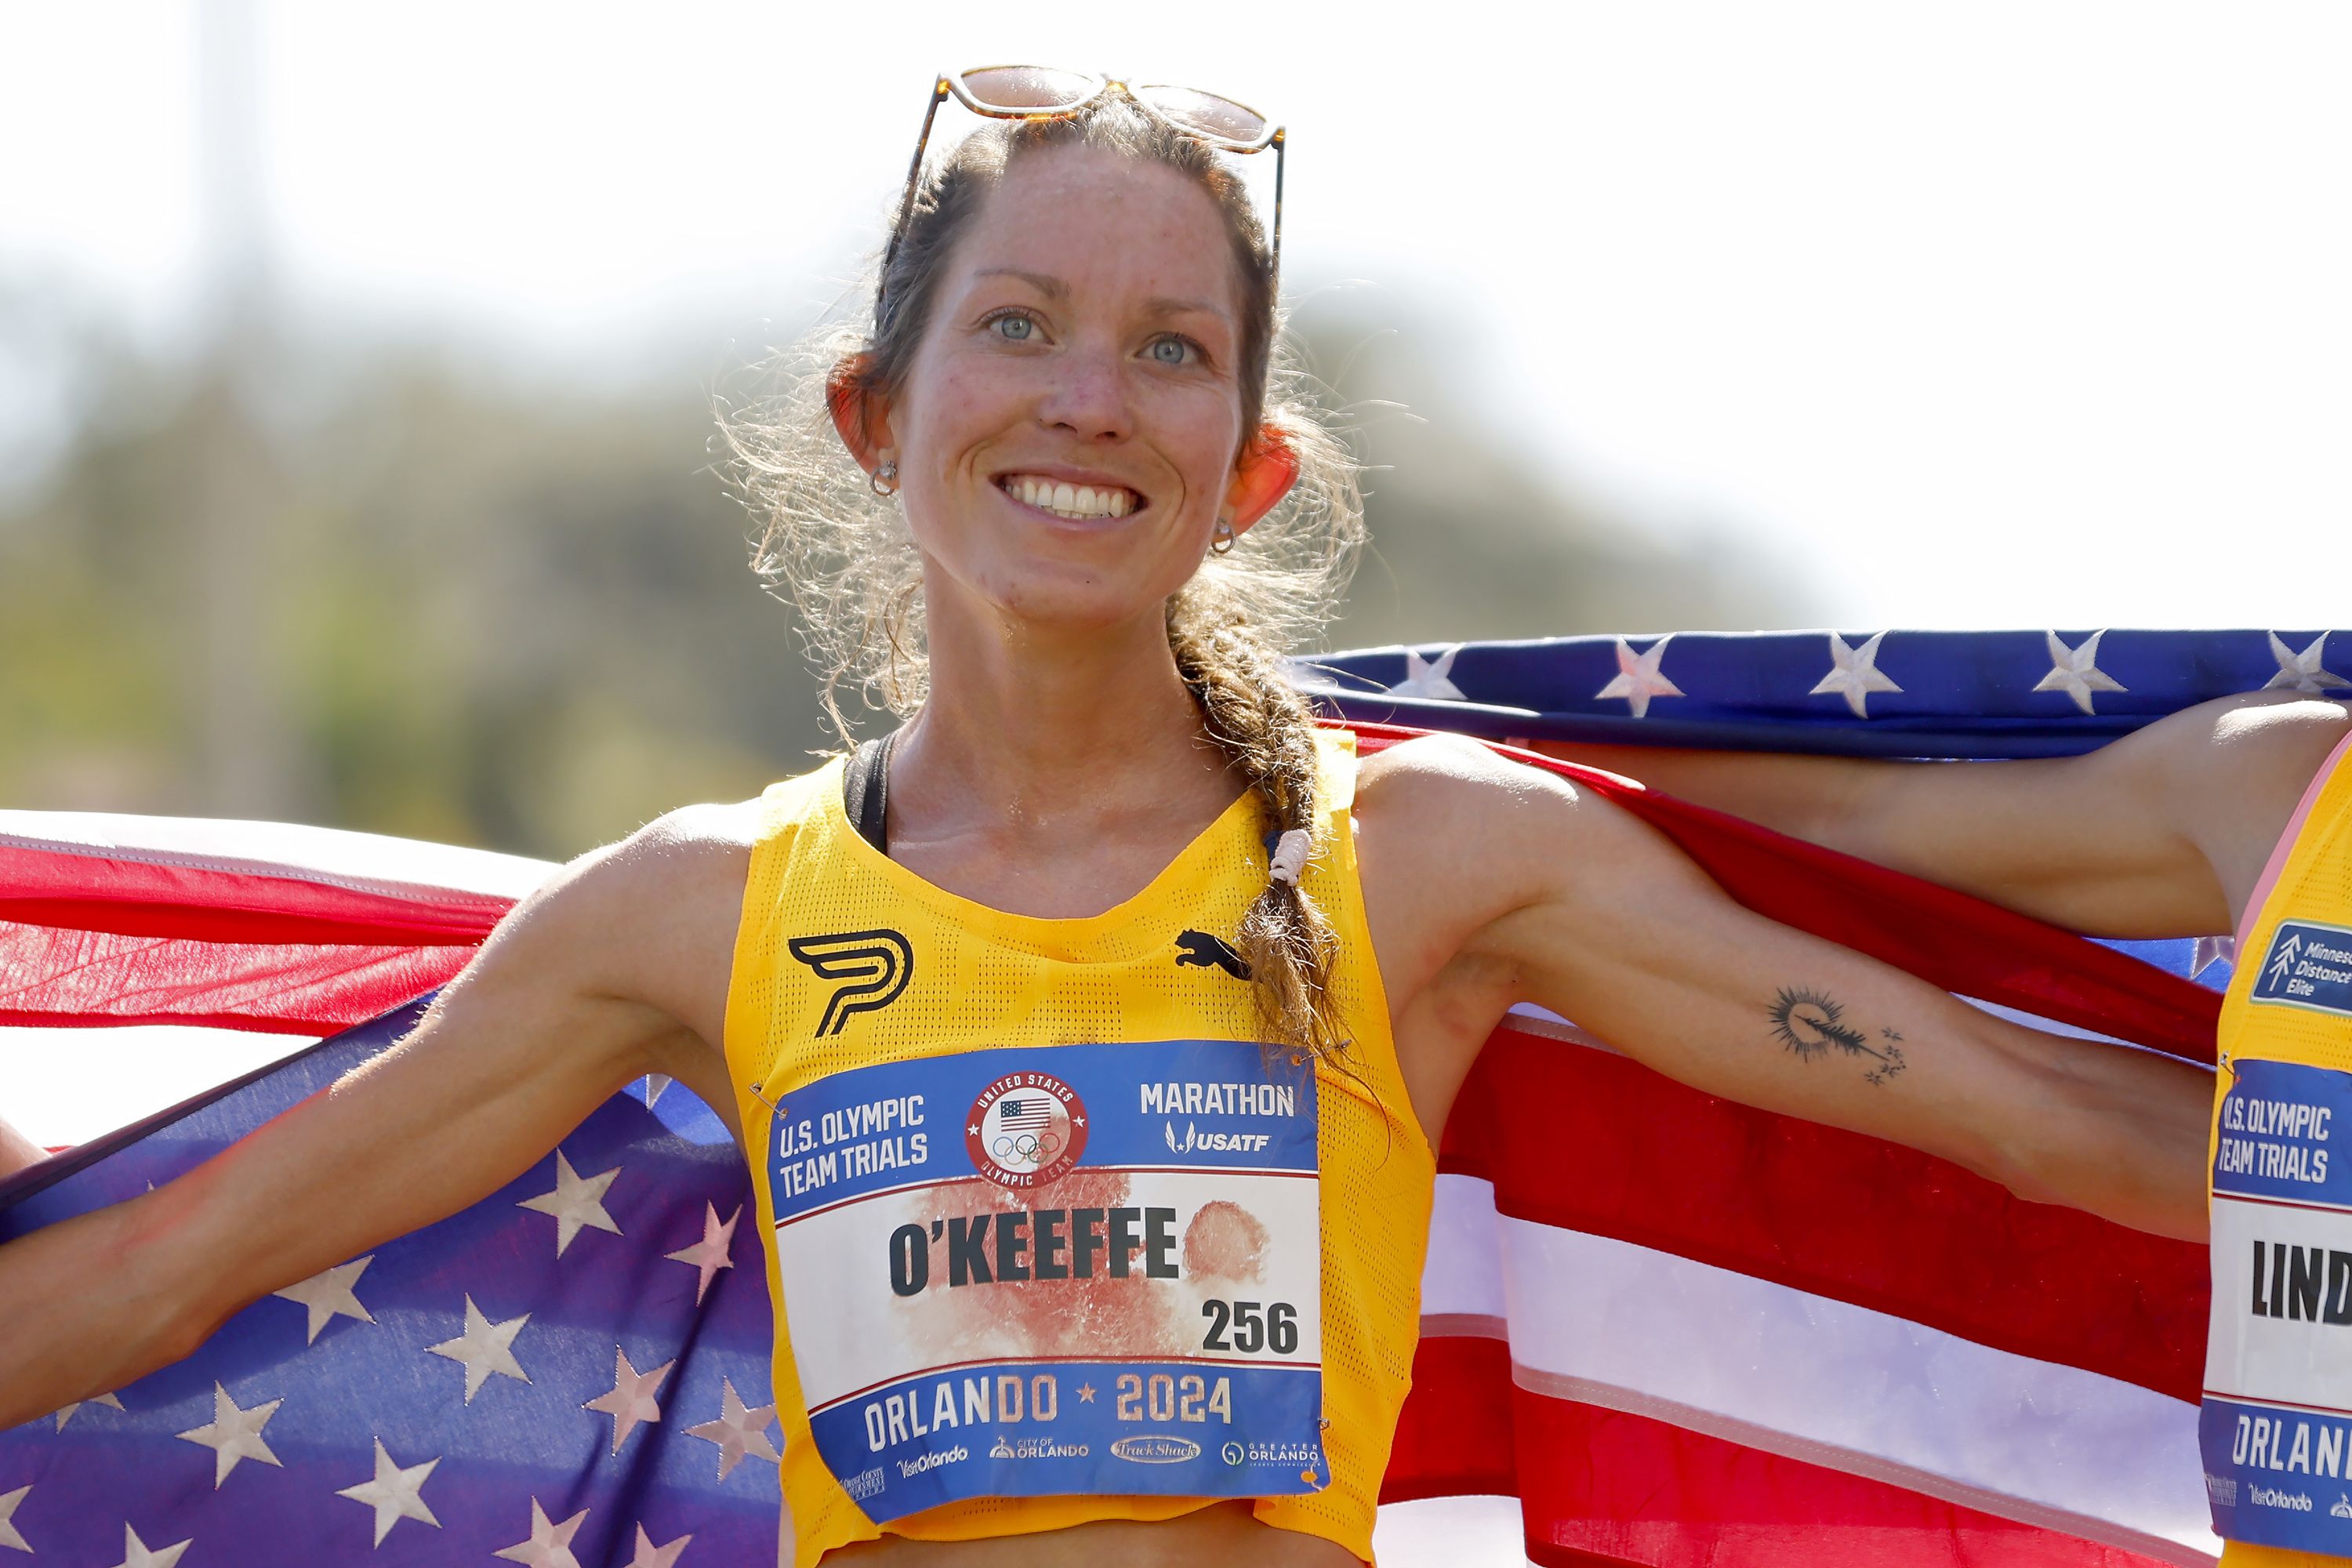 Fiona O'Keeffe crushes US Olympic Marathon Trials record in Orlando on  debut